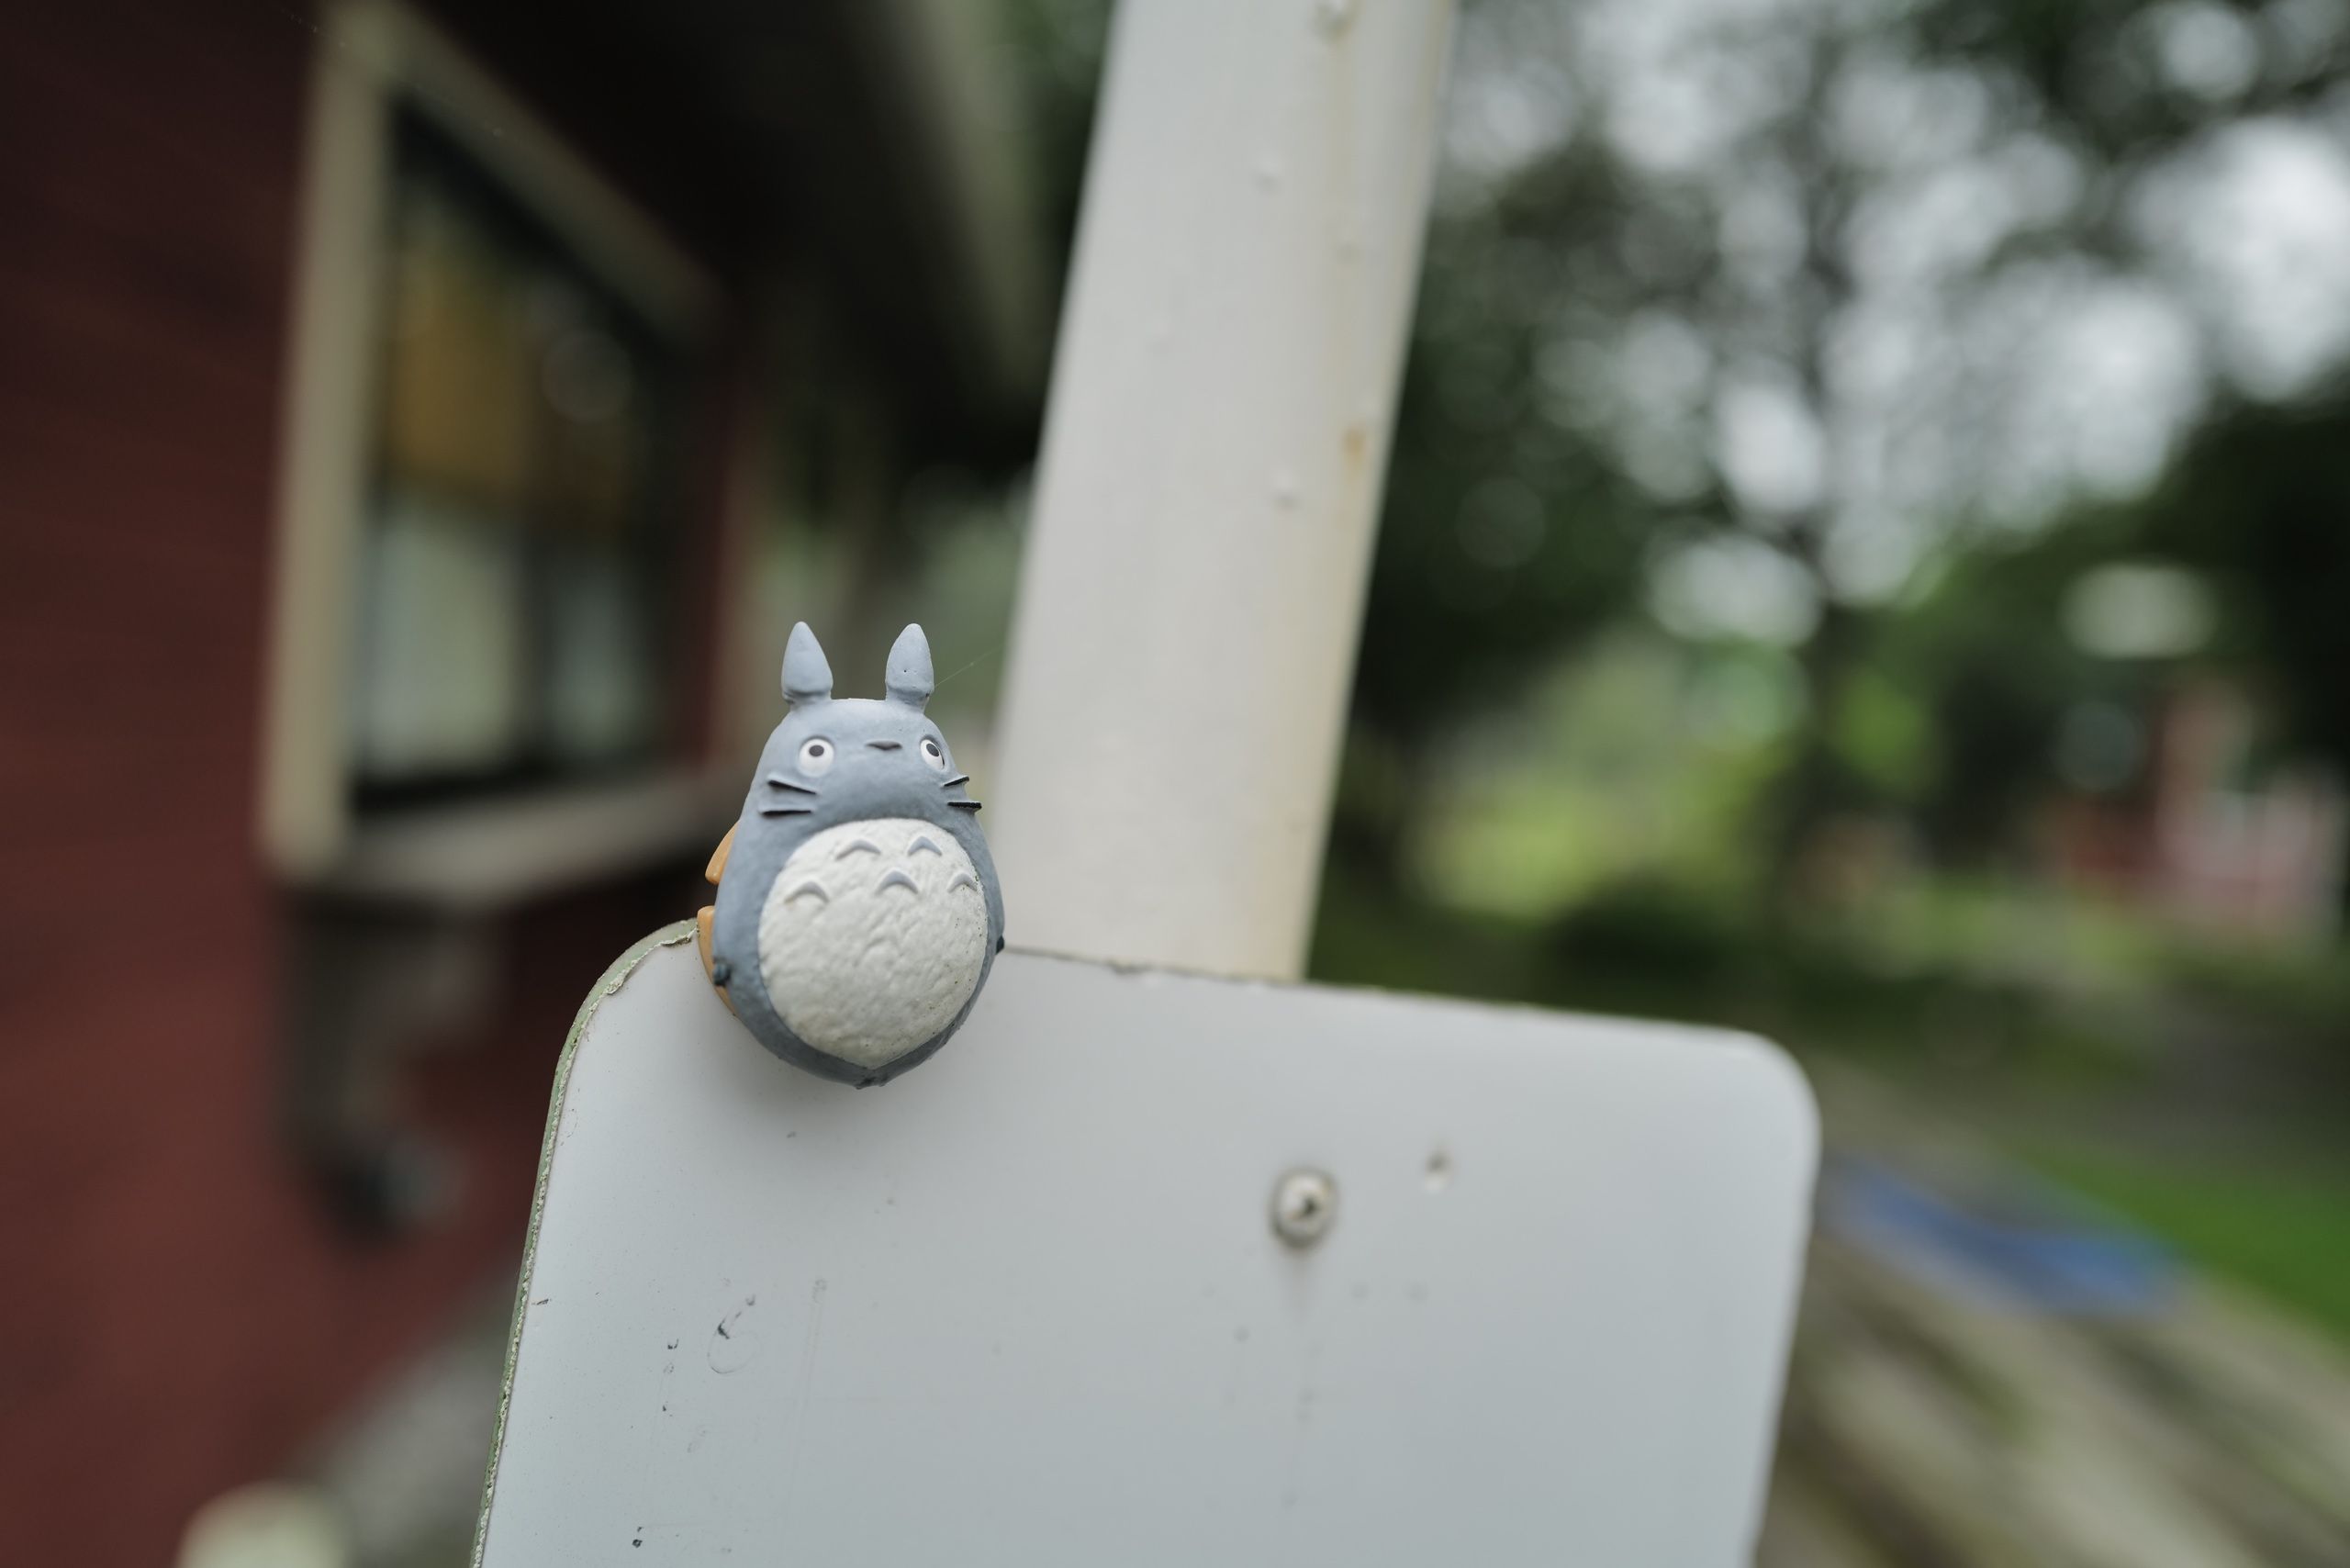 A small totoro perched on a blank sign.